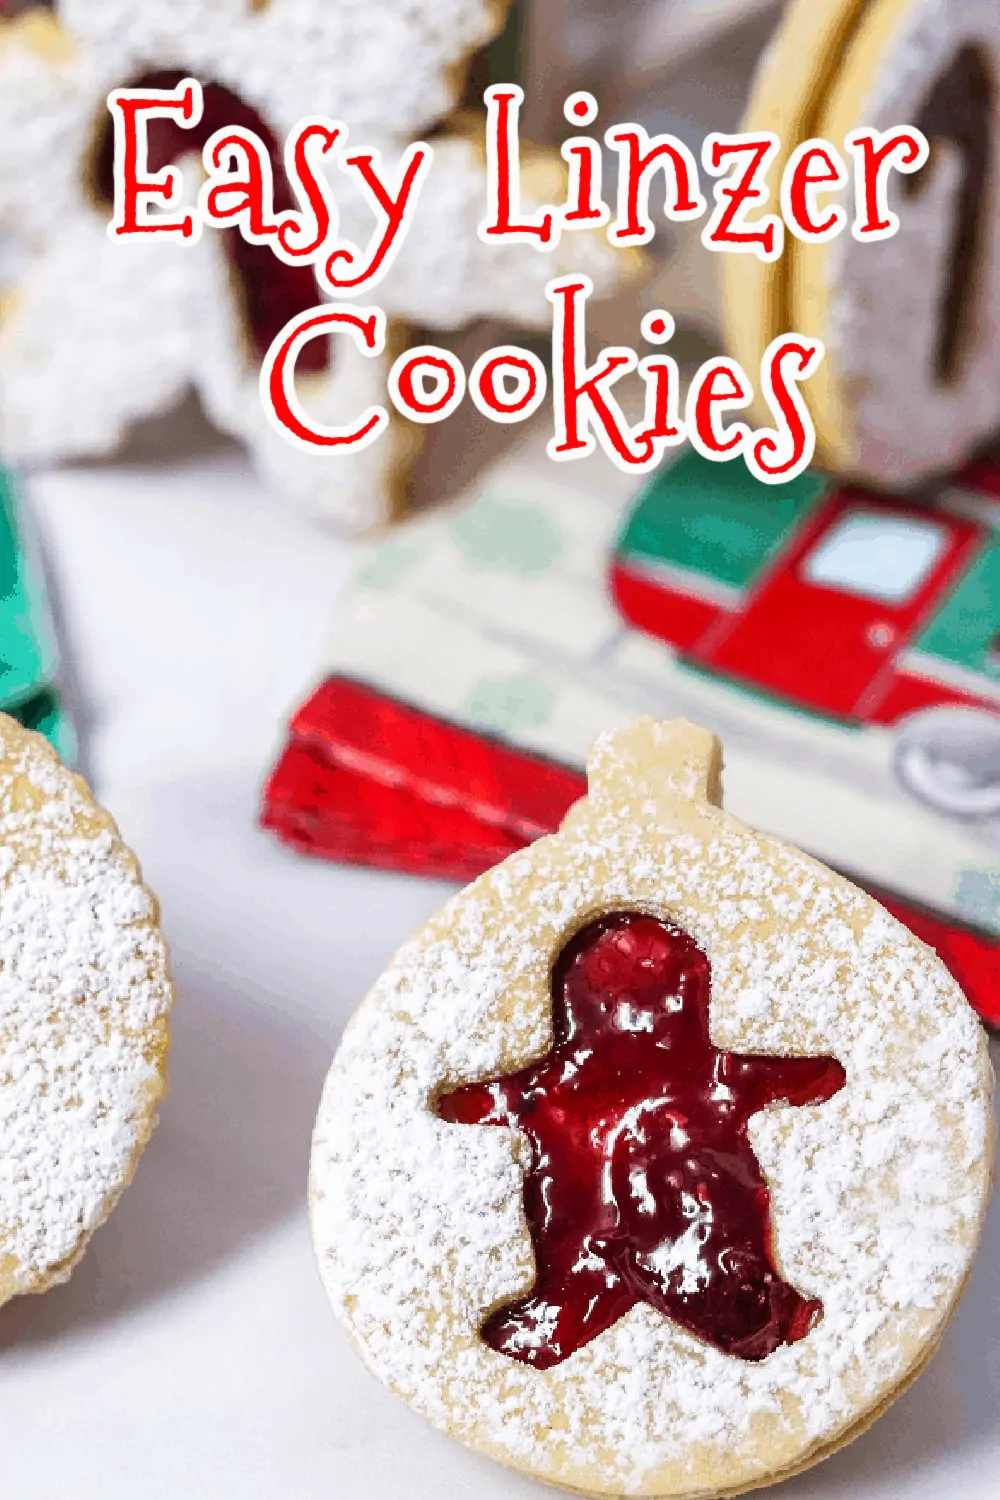 These buttery shortbread Linzer cookies are filled with raspberry jam that peeks through the cutout on top of each cookie. Dusted with powdered sugar, these sandwich cookies make the perfect holiday sweet treat. So easy to make with only a few ingredients! Get those cookie cutters out! via @Mooreorlesscook